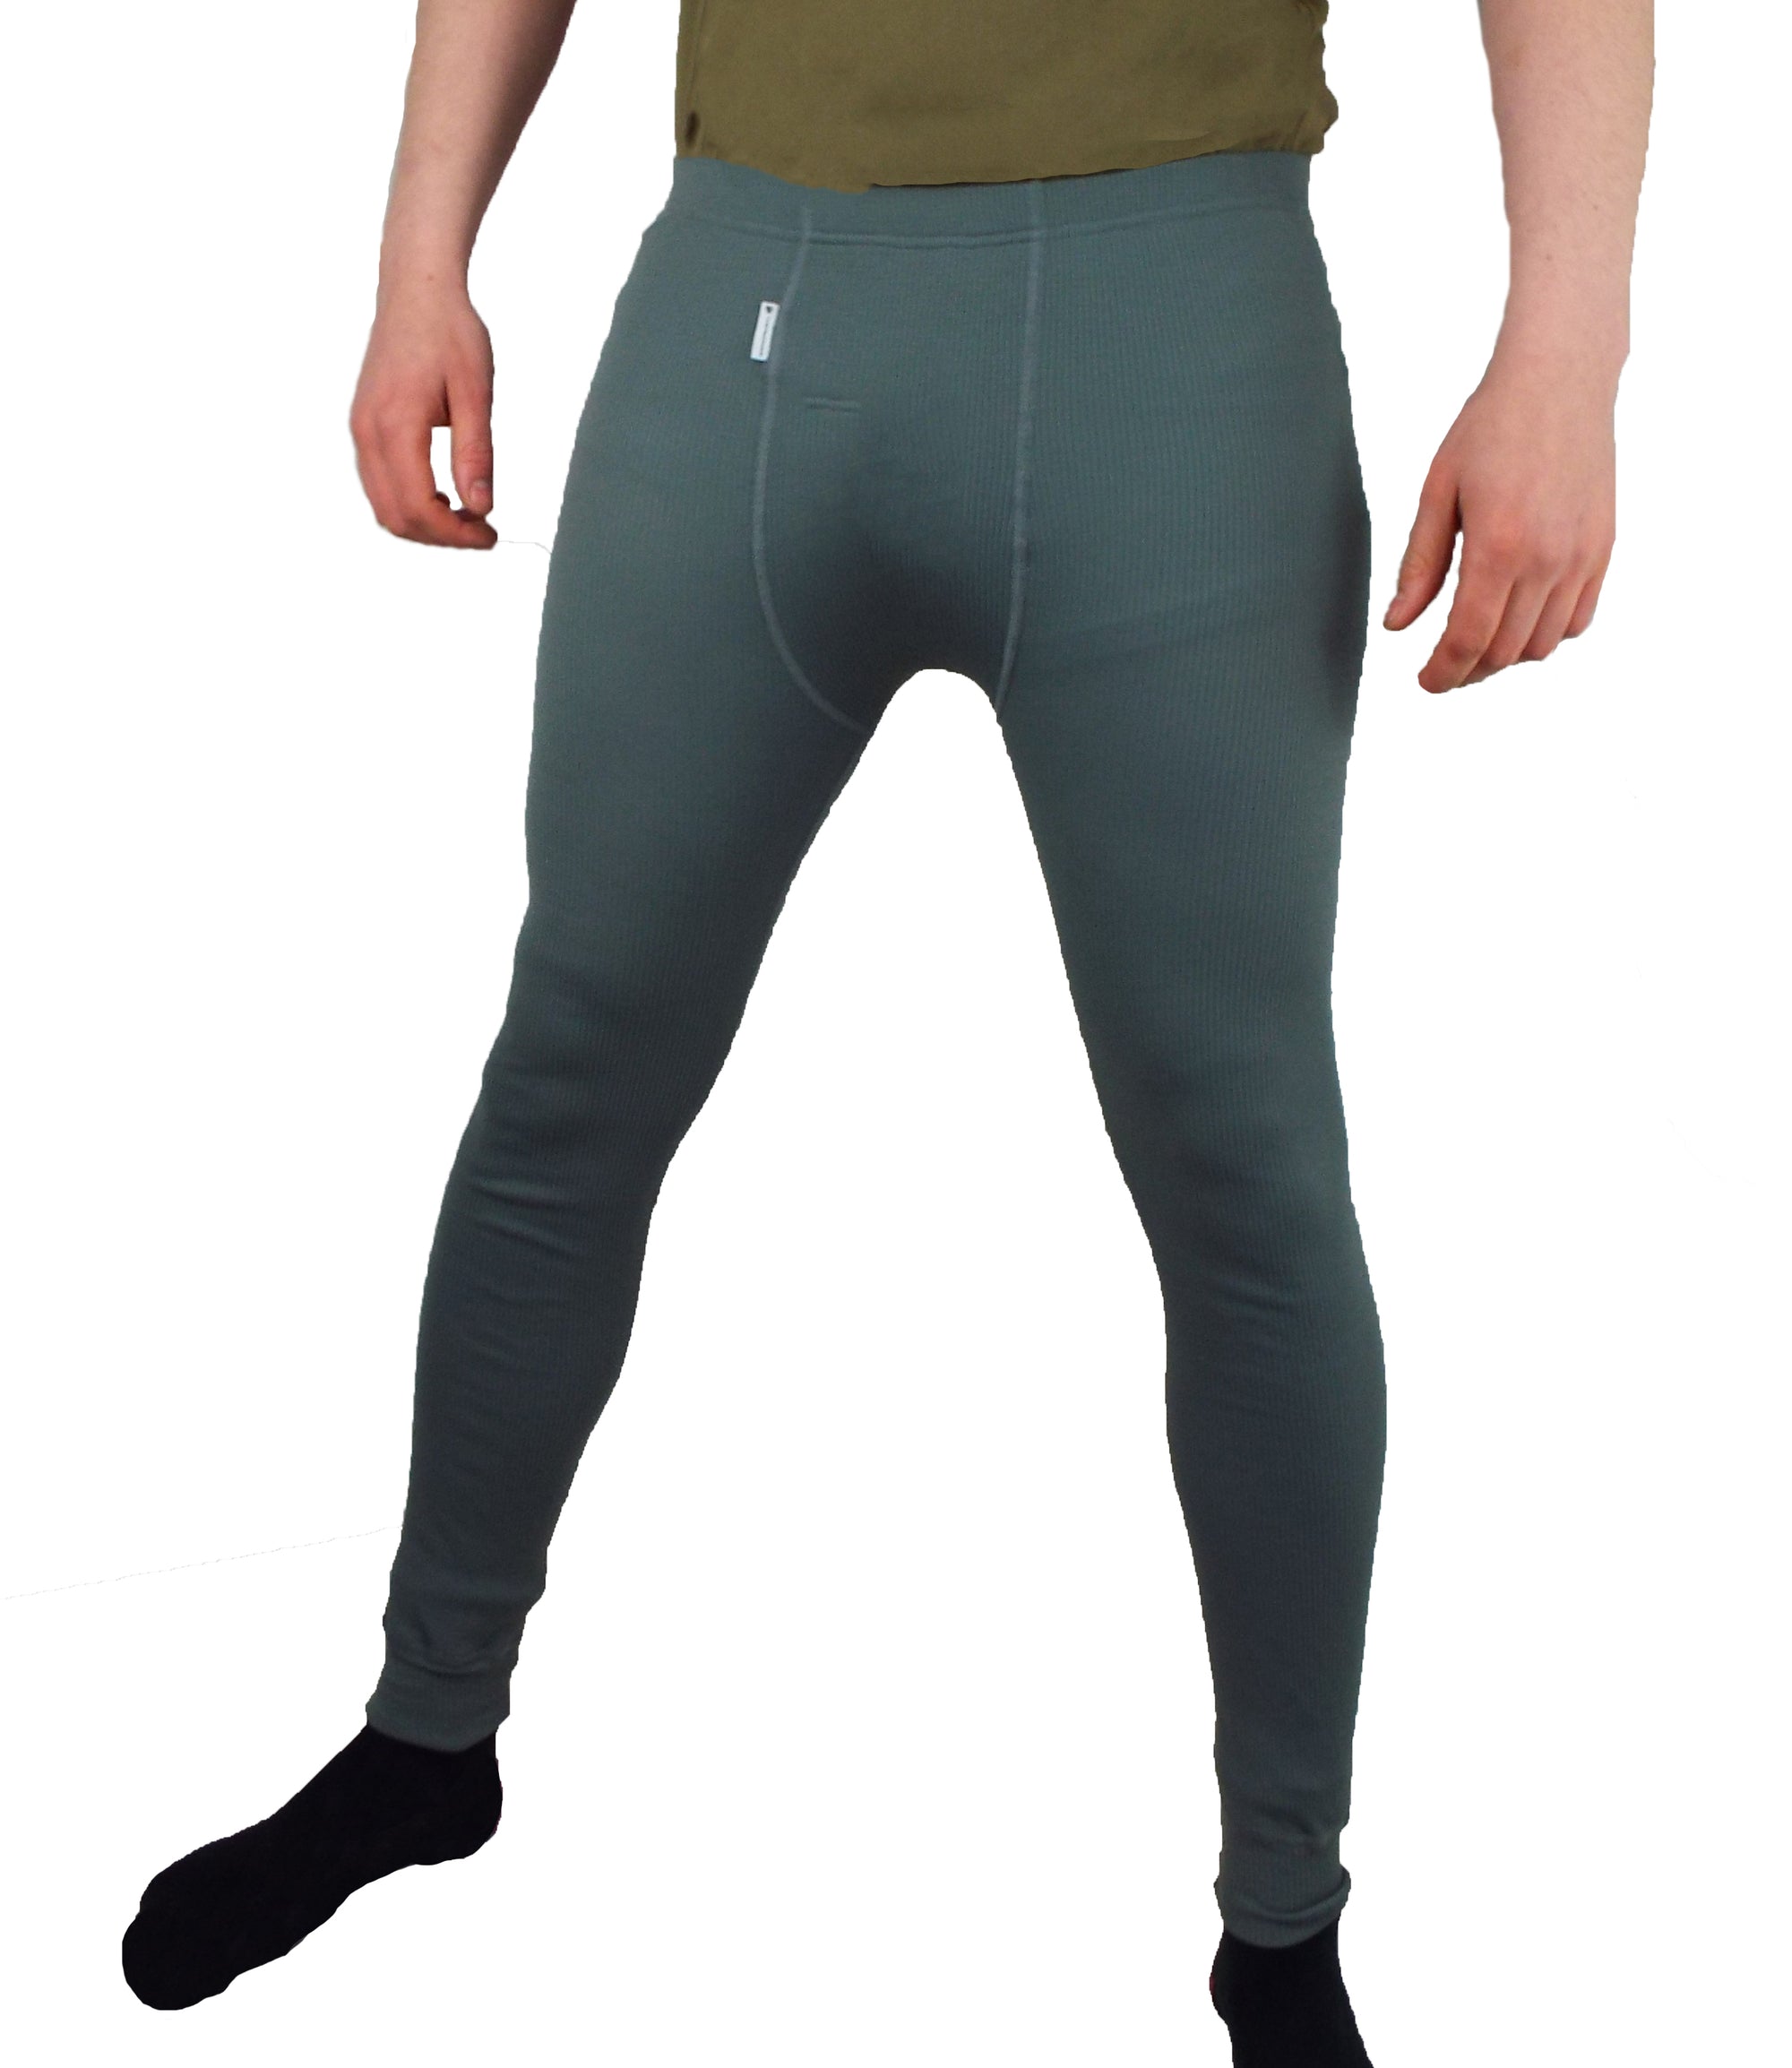 Dutch Army - Thermowave Grey Long-Johns - Grade 1